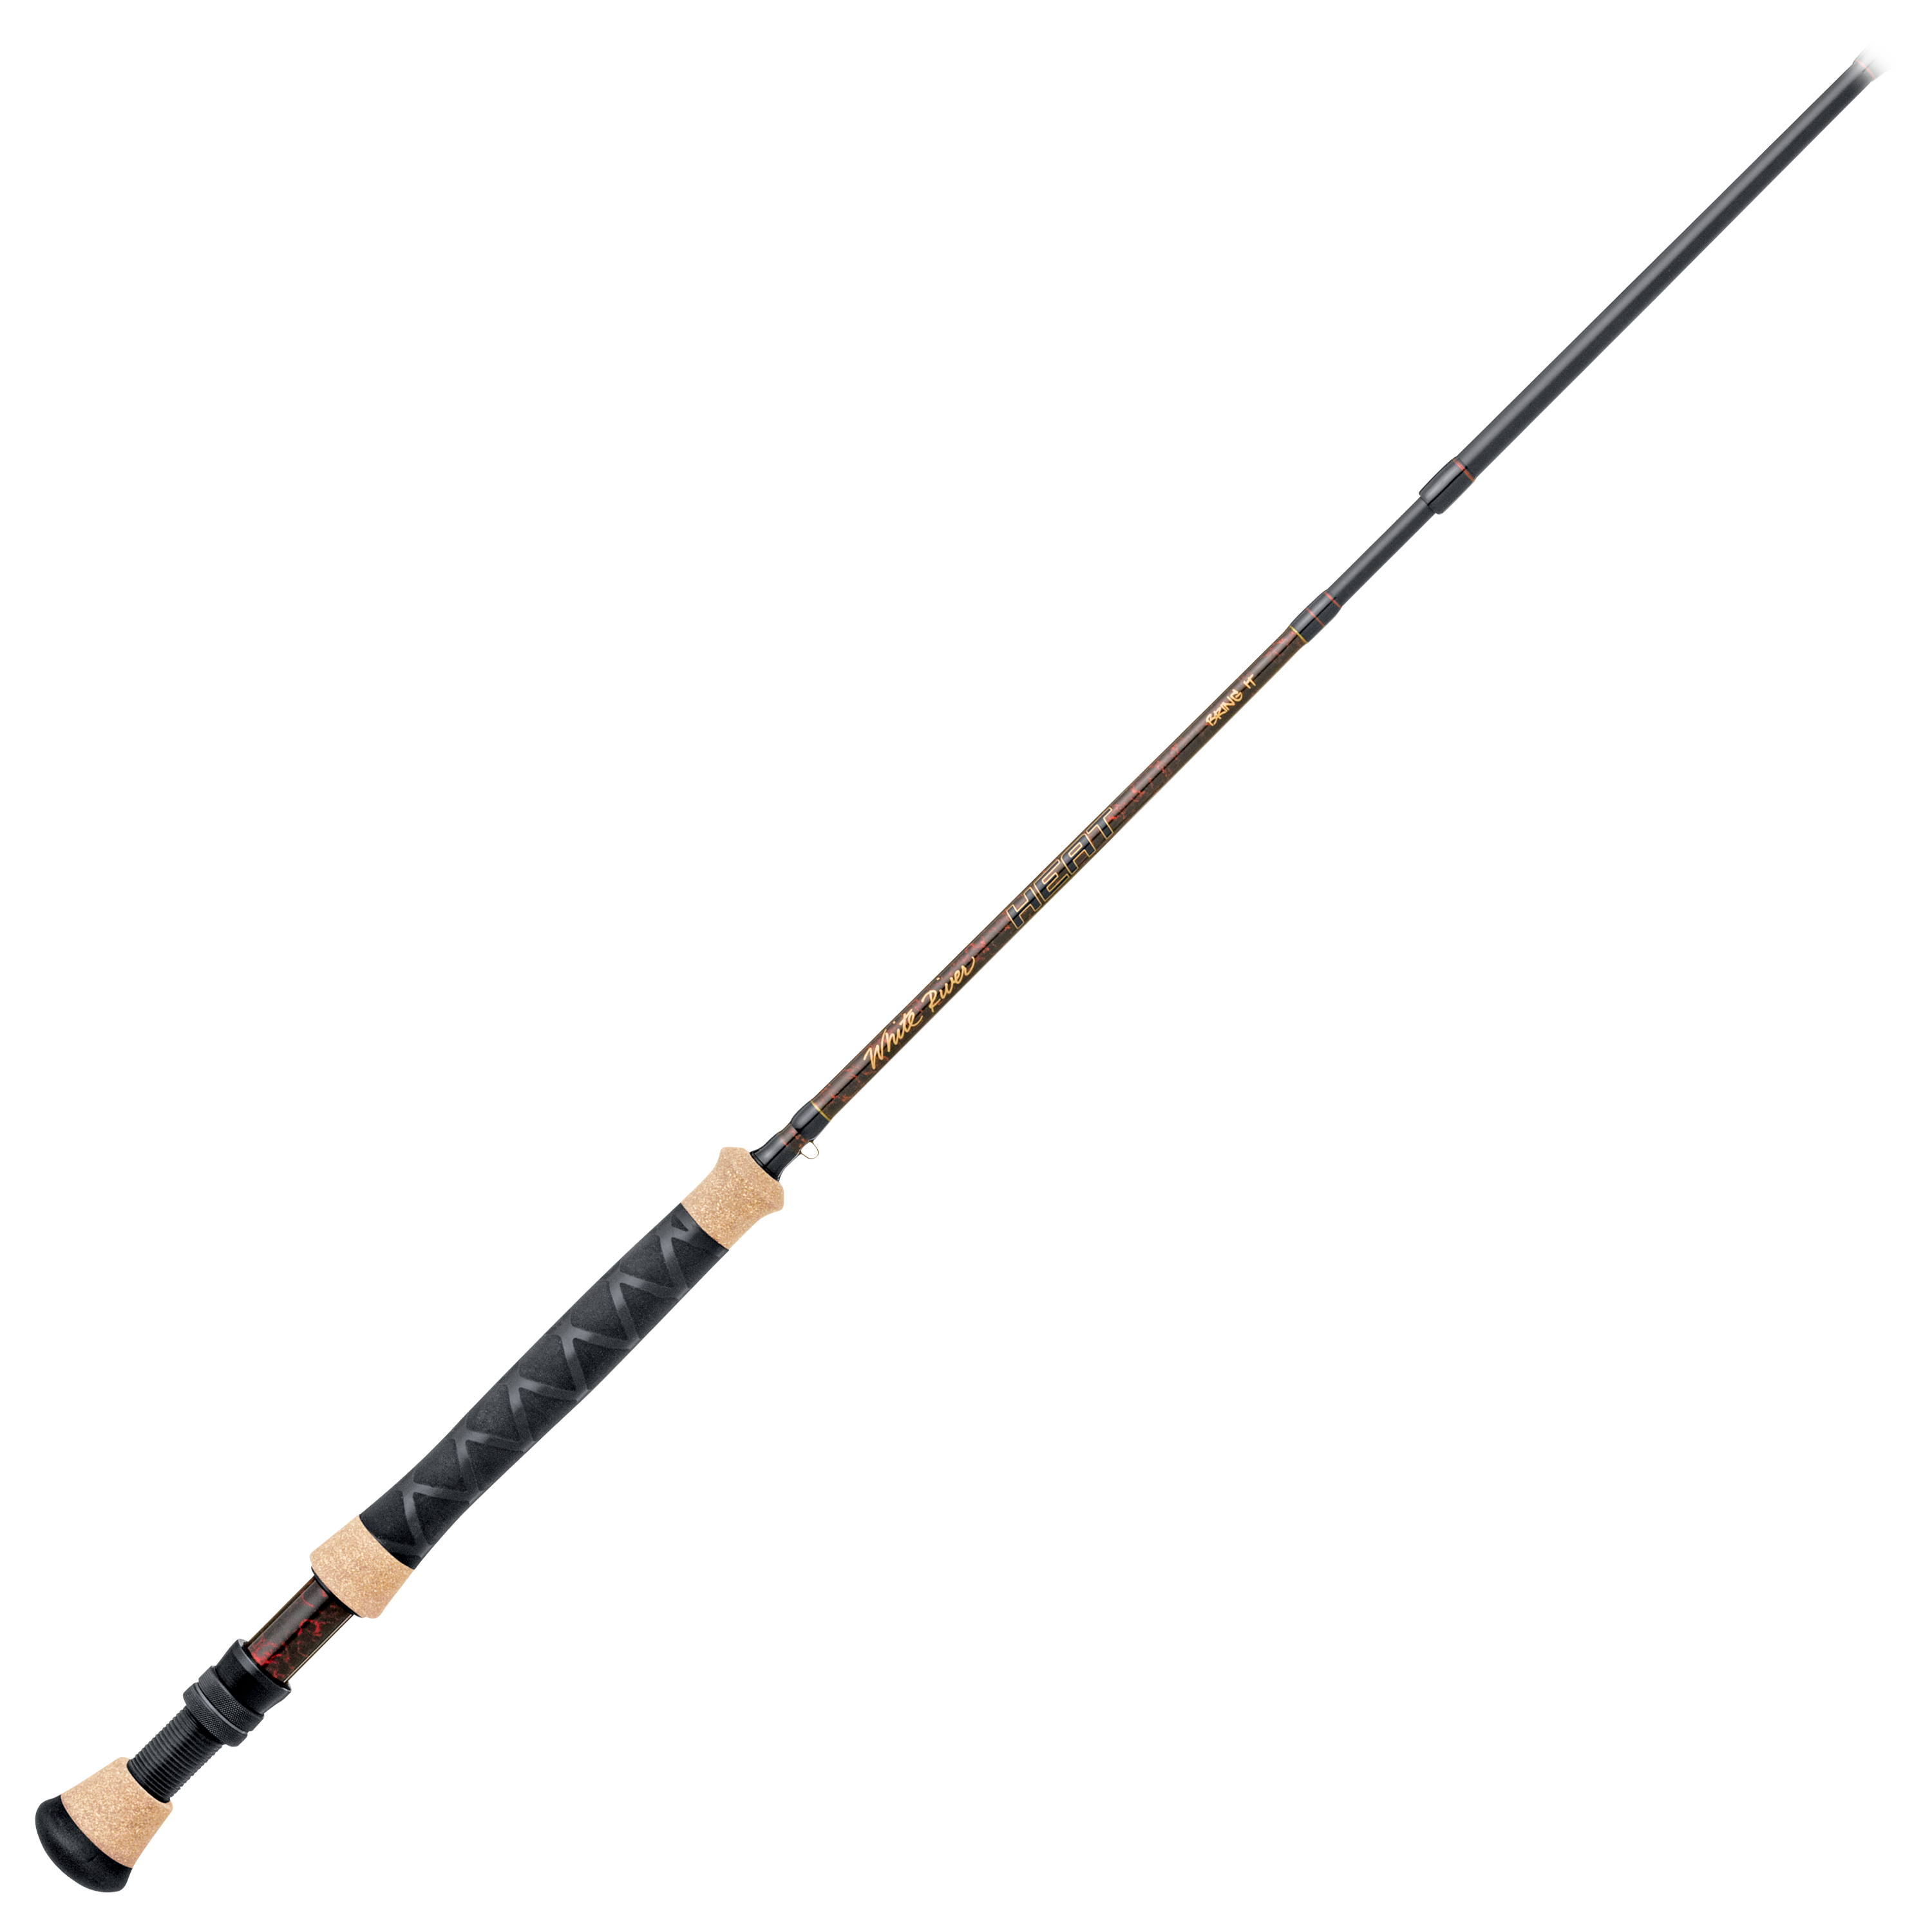 Steelhead Fly Fishing Rod 10 ft Item Fishing Rods 7 wt Line Weight & Poles  for sale